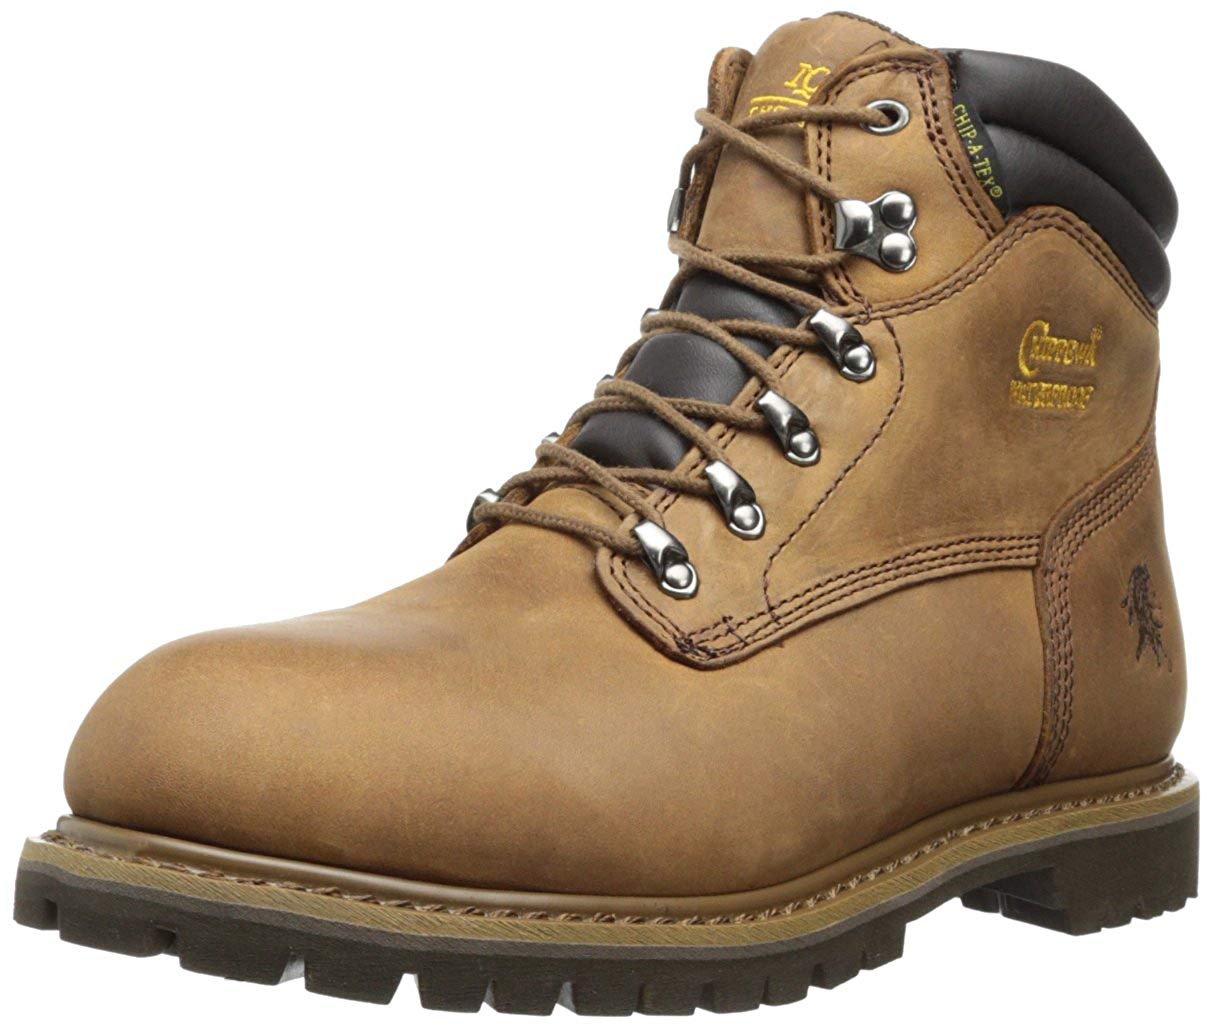 Chippewa Men's 6 Inch Waterproof Tough Bark Insulated Lace-Up Utility Boot